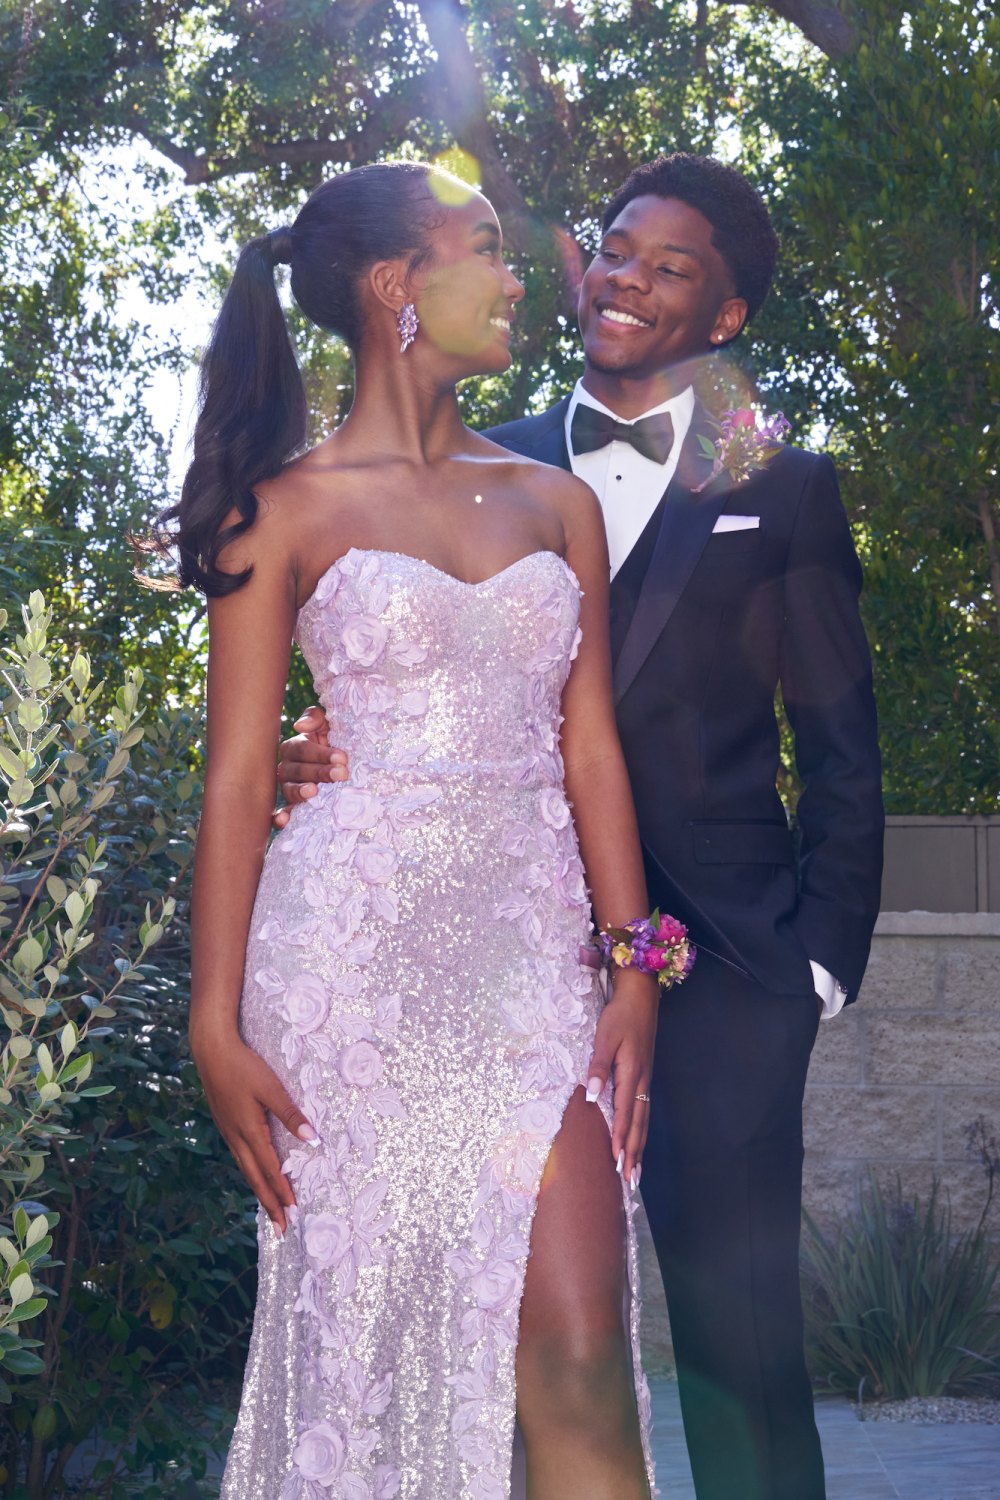 Diddy's daughter Chance chooses Chloe and Halle Bailey's brother Branson as her prom date